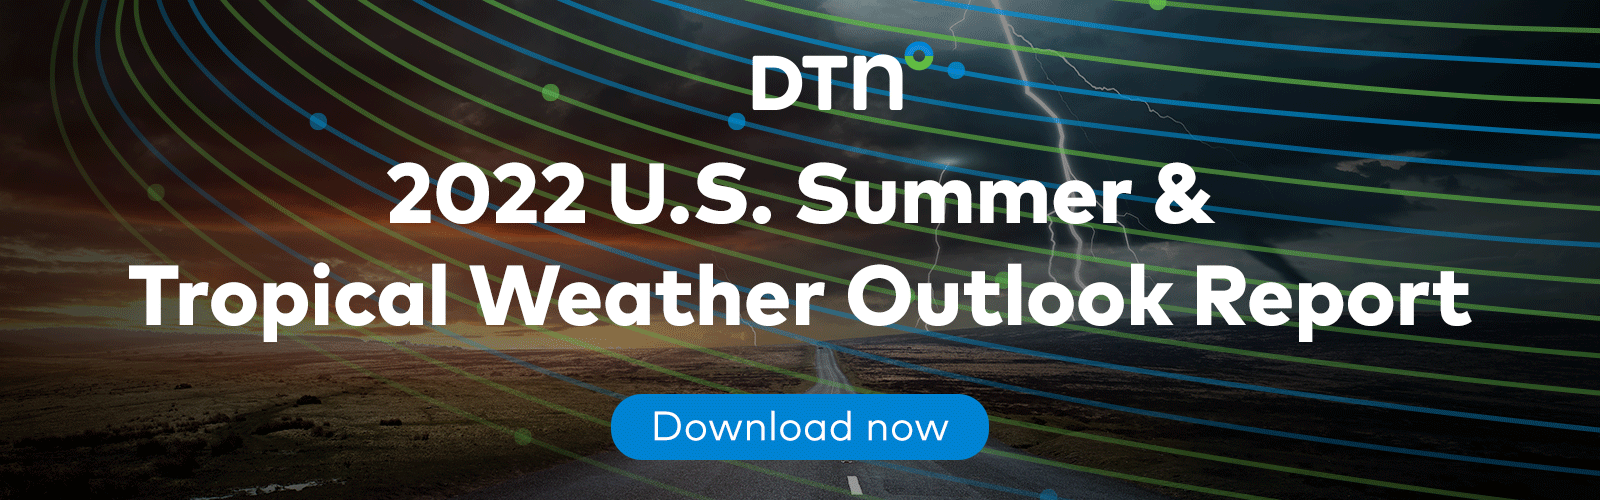 DTN | 2022 U.S. Summer and Tropical Weather Outlook Report | Download now